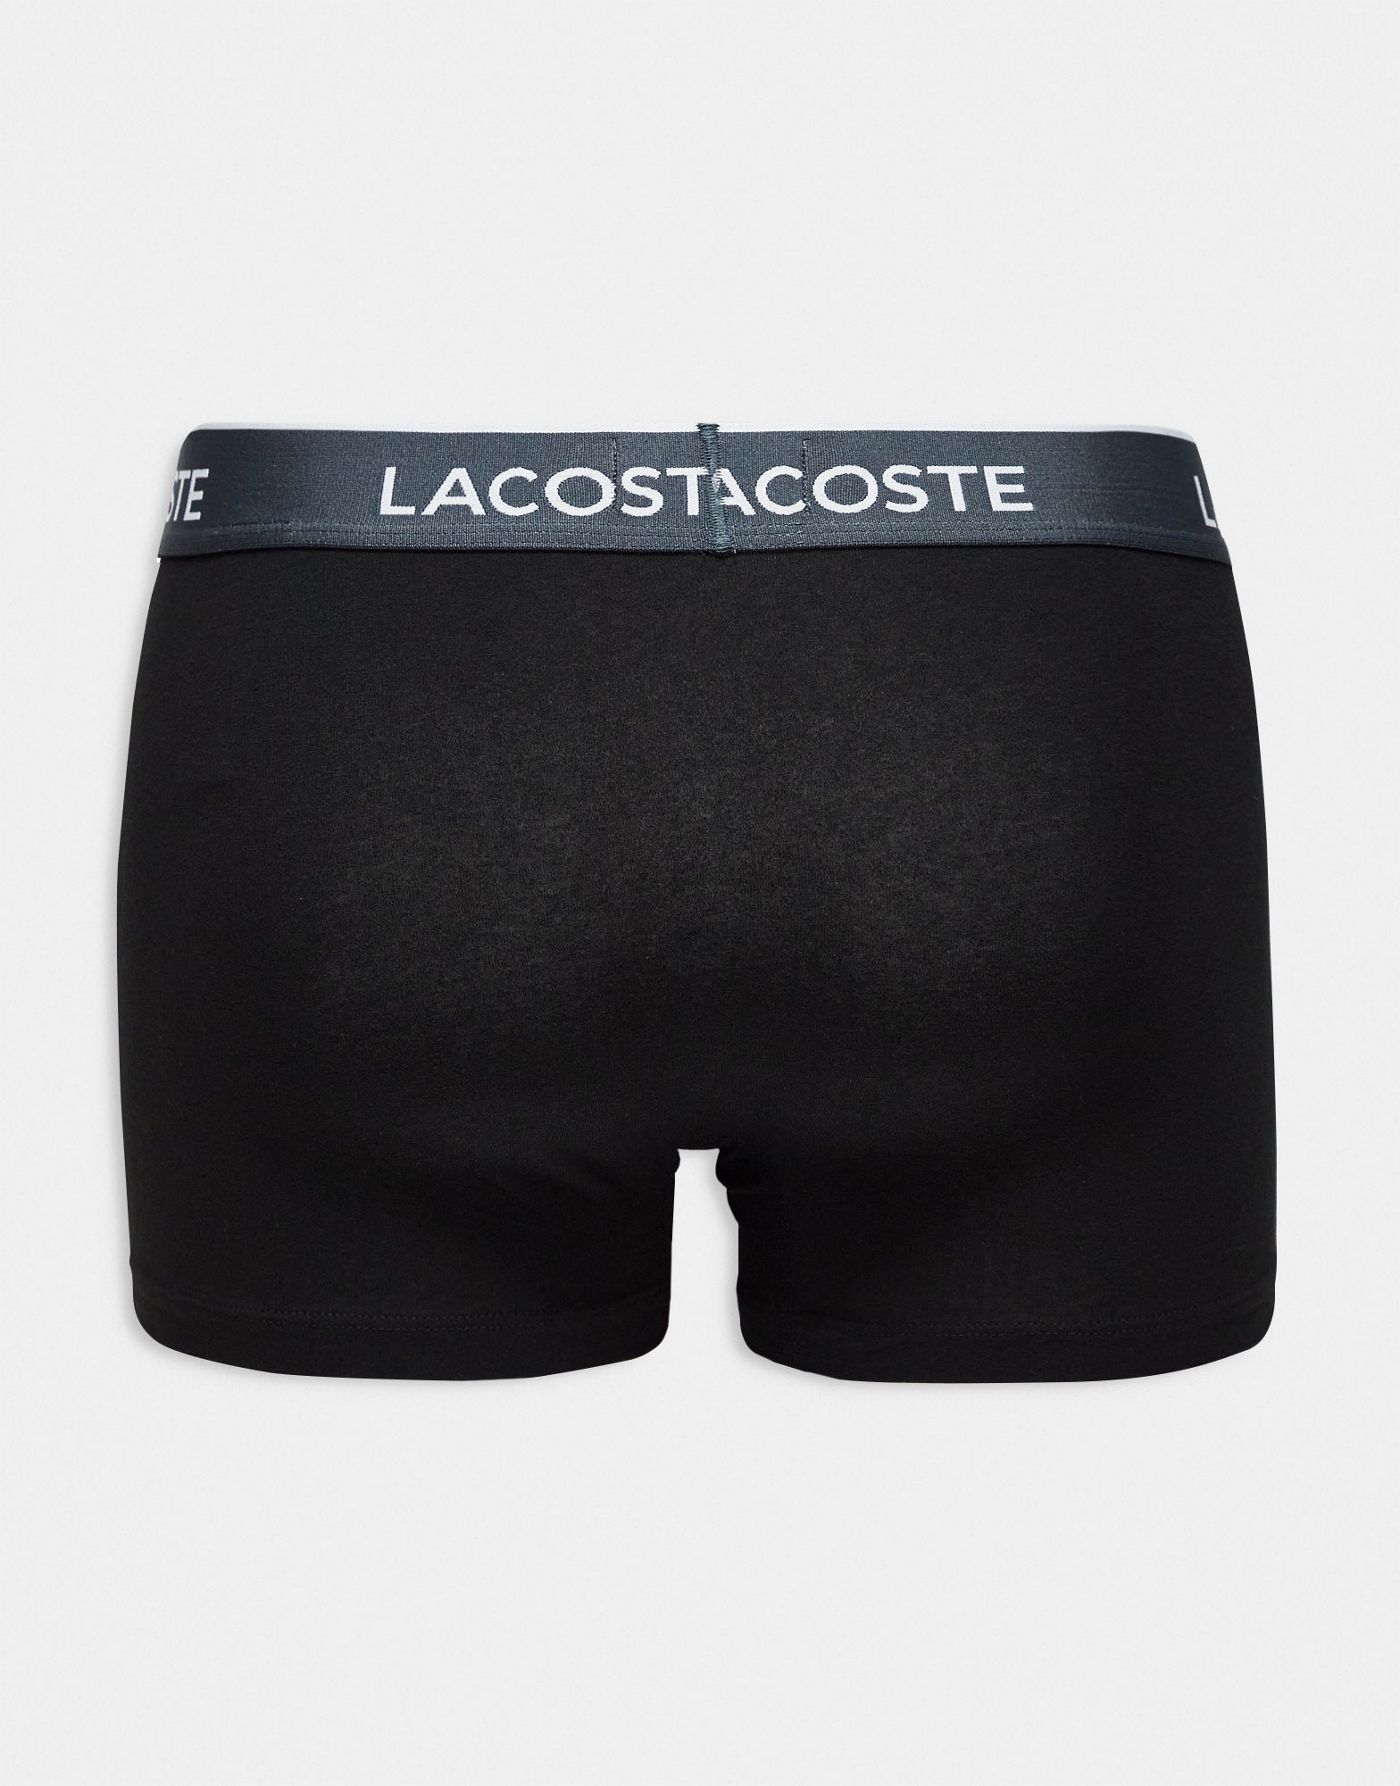 Lacoste essentials 3 pack trunks in black with contrast waistband